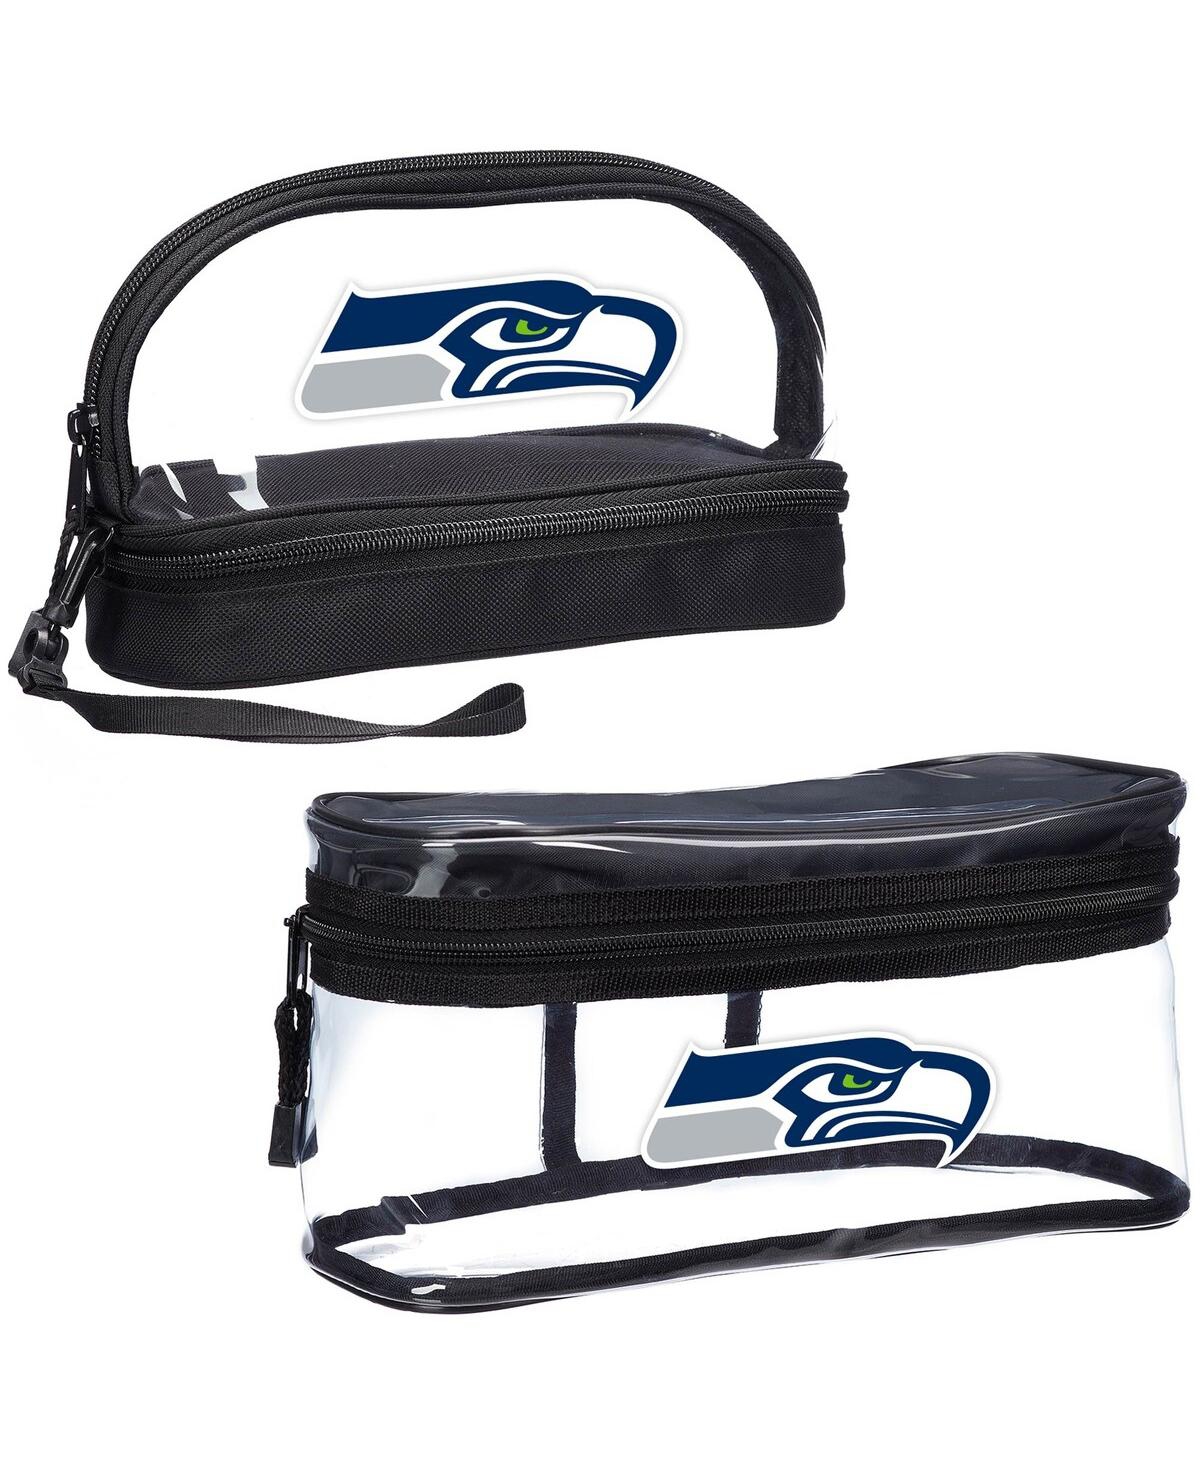 Men's and Women's The Northwest Company Seattle Seahawks Two-Piece Travel Set - Black